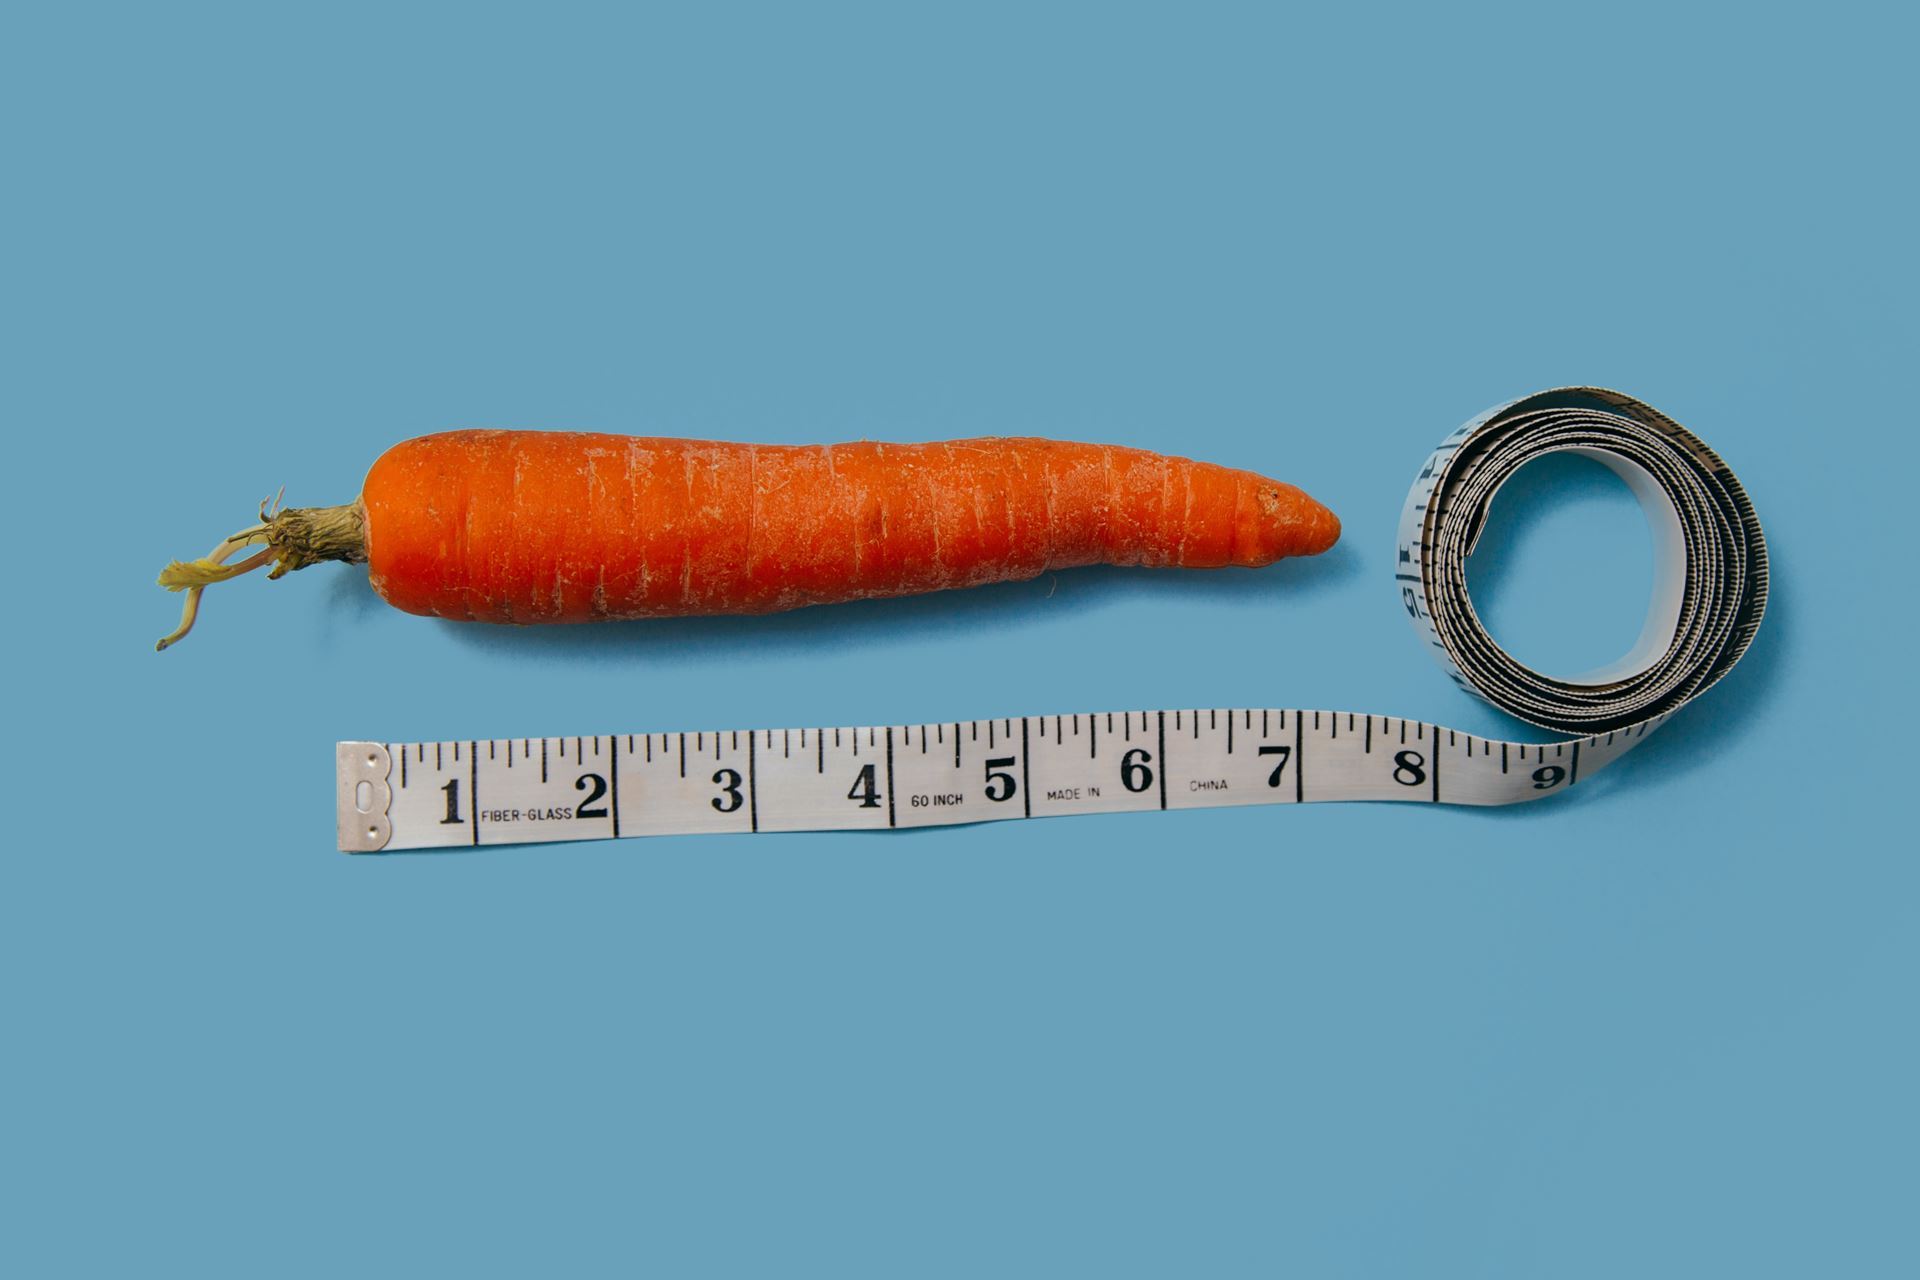 A tape measure lying next to a carrot. The carrot's length is unimportant.